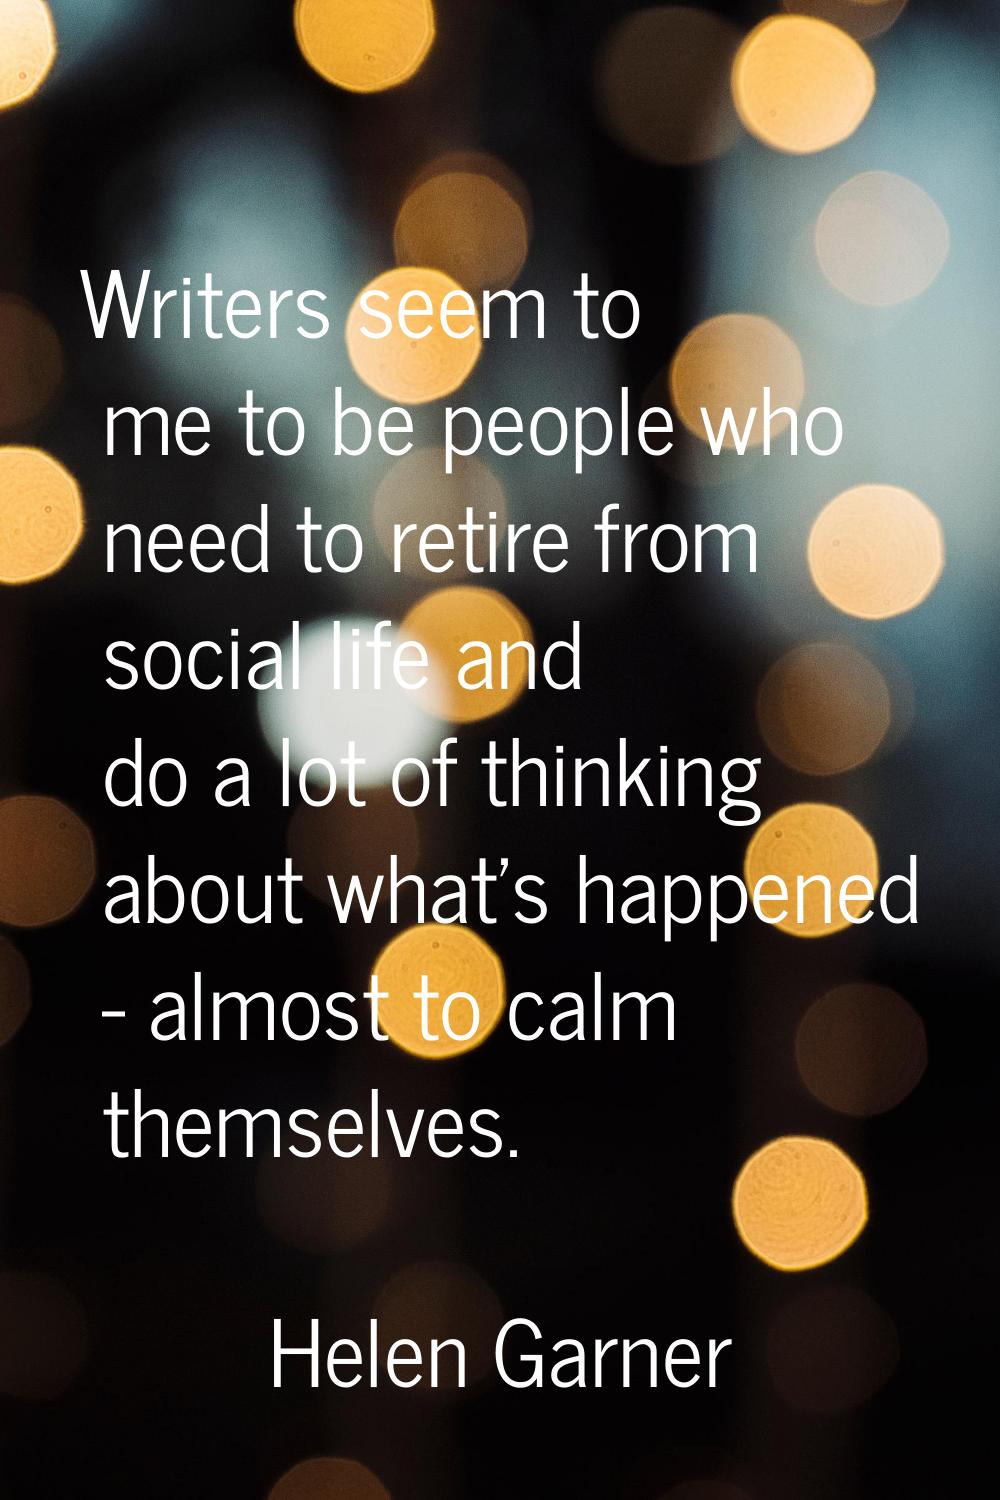 Writers seem to me to be people who need to retire from social life and do a lot of thinking about 